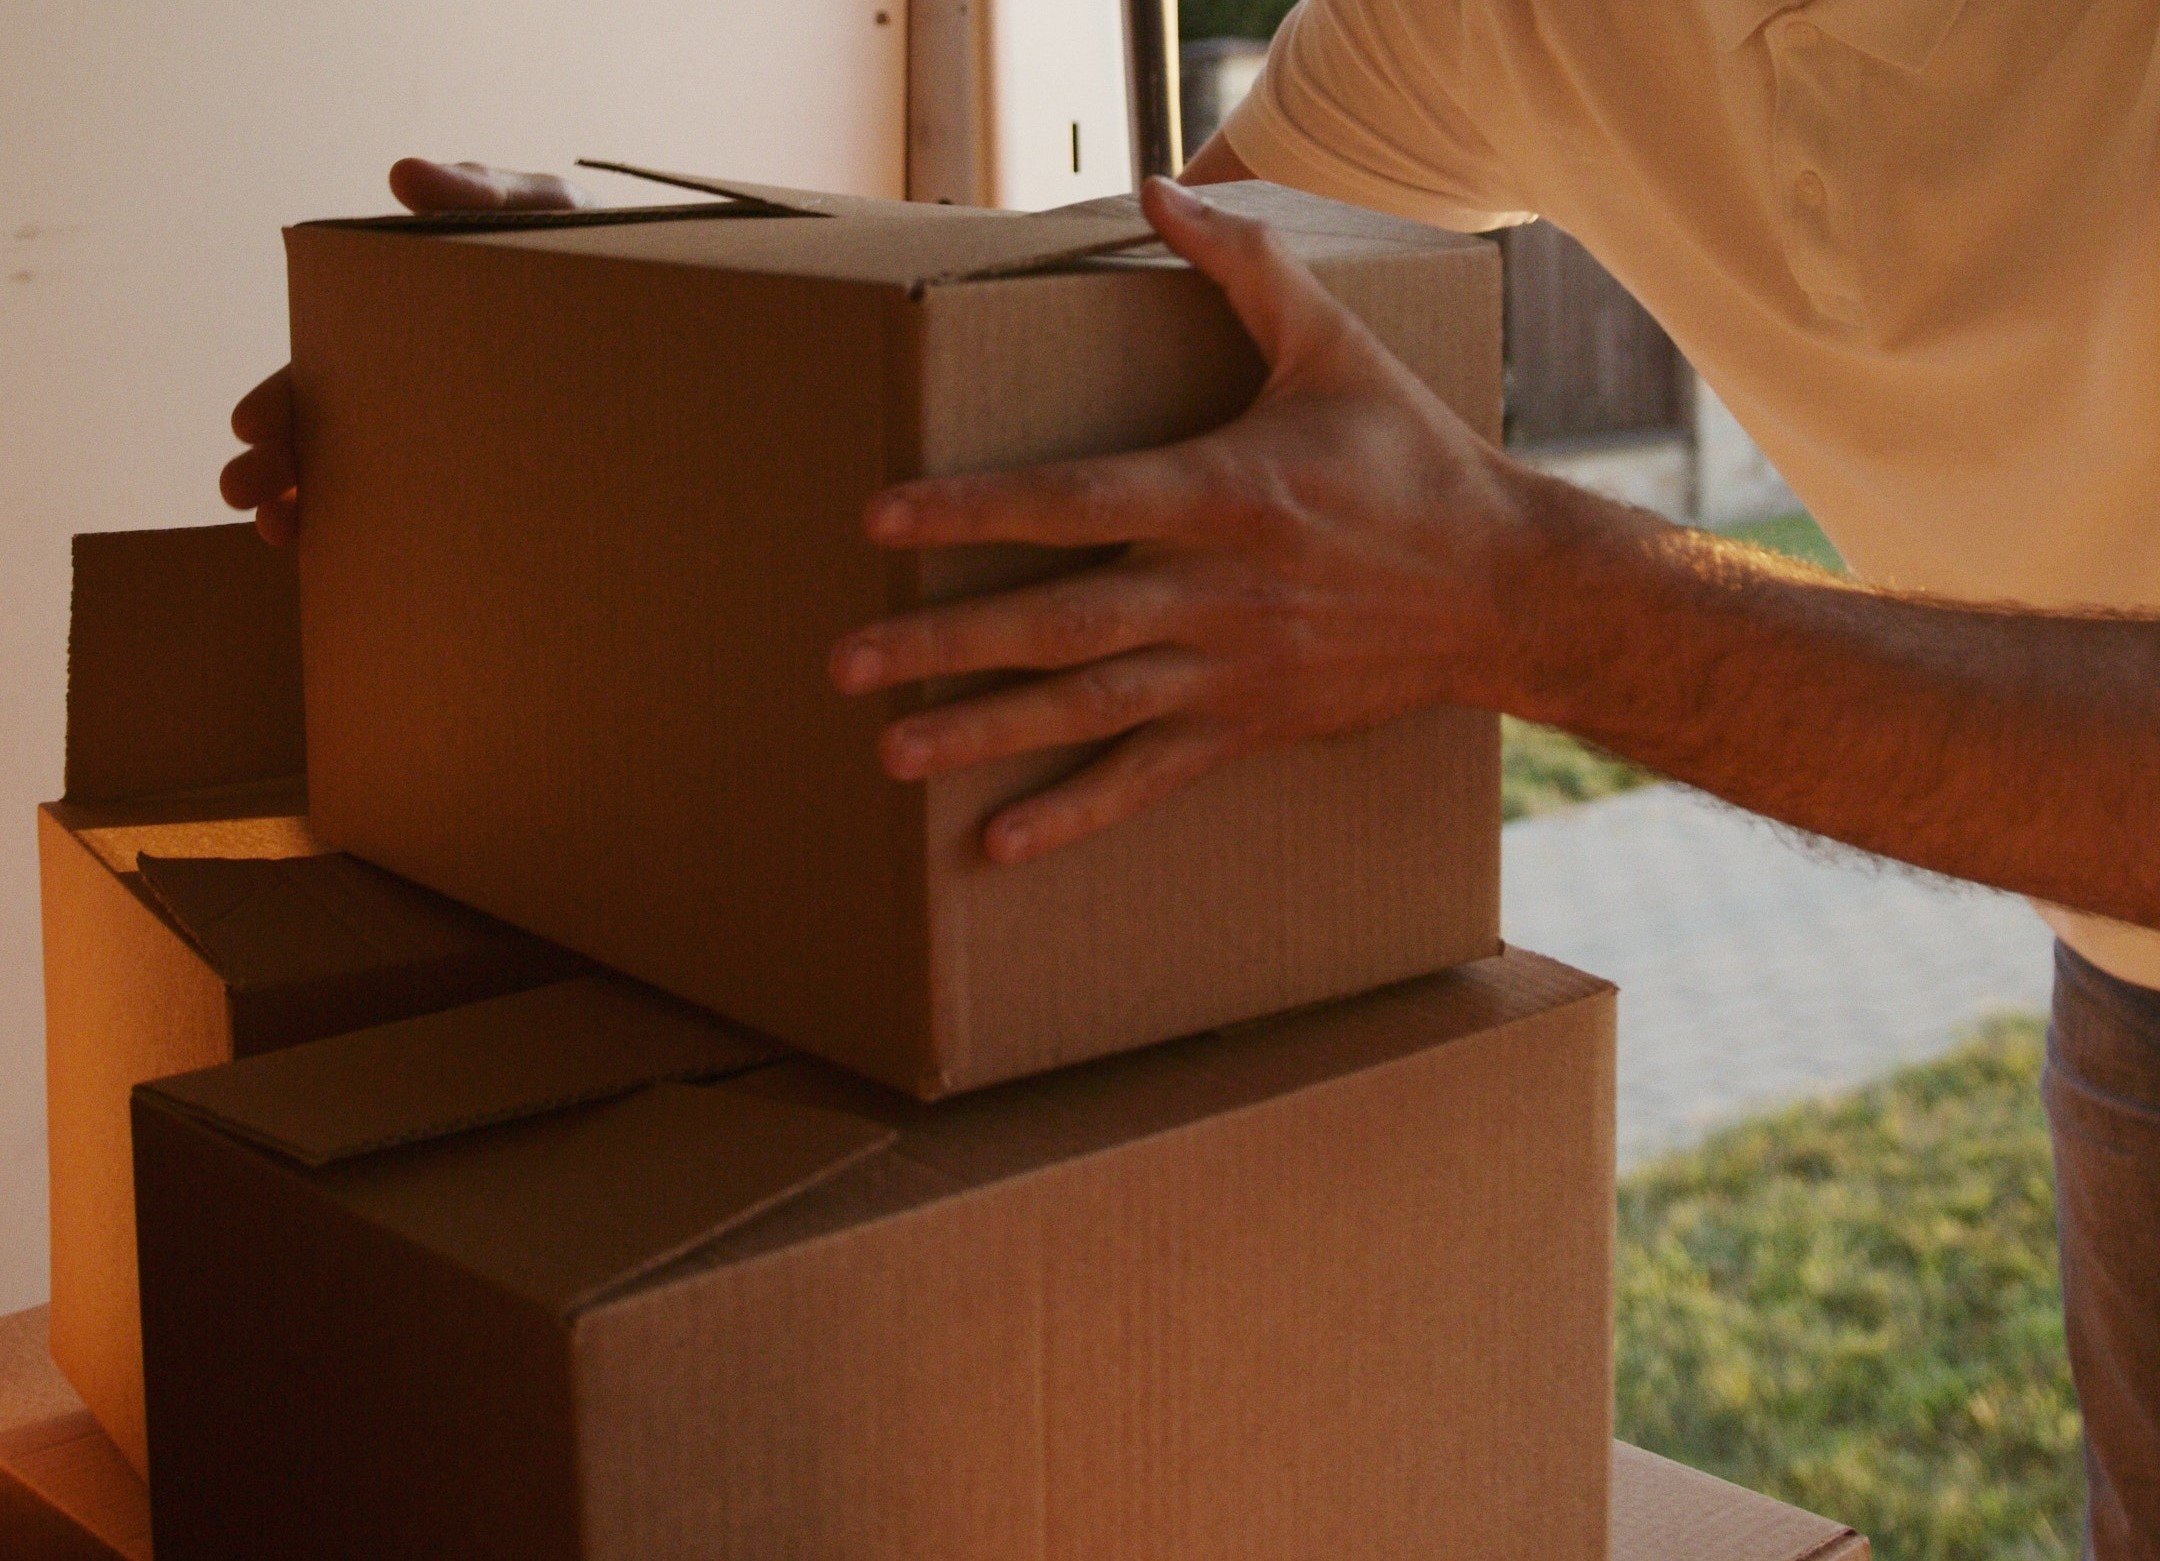 Years later, OP moved out of his house & took plenty of cartons along. | Source: Pexels